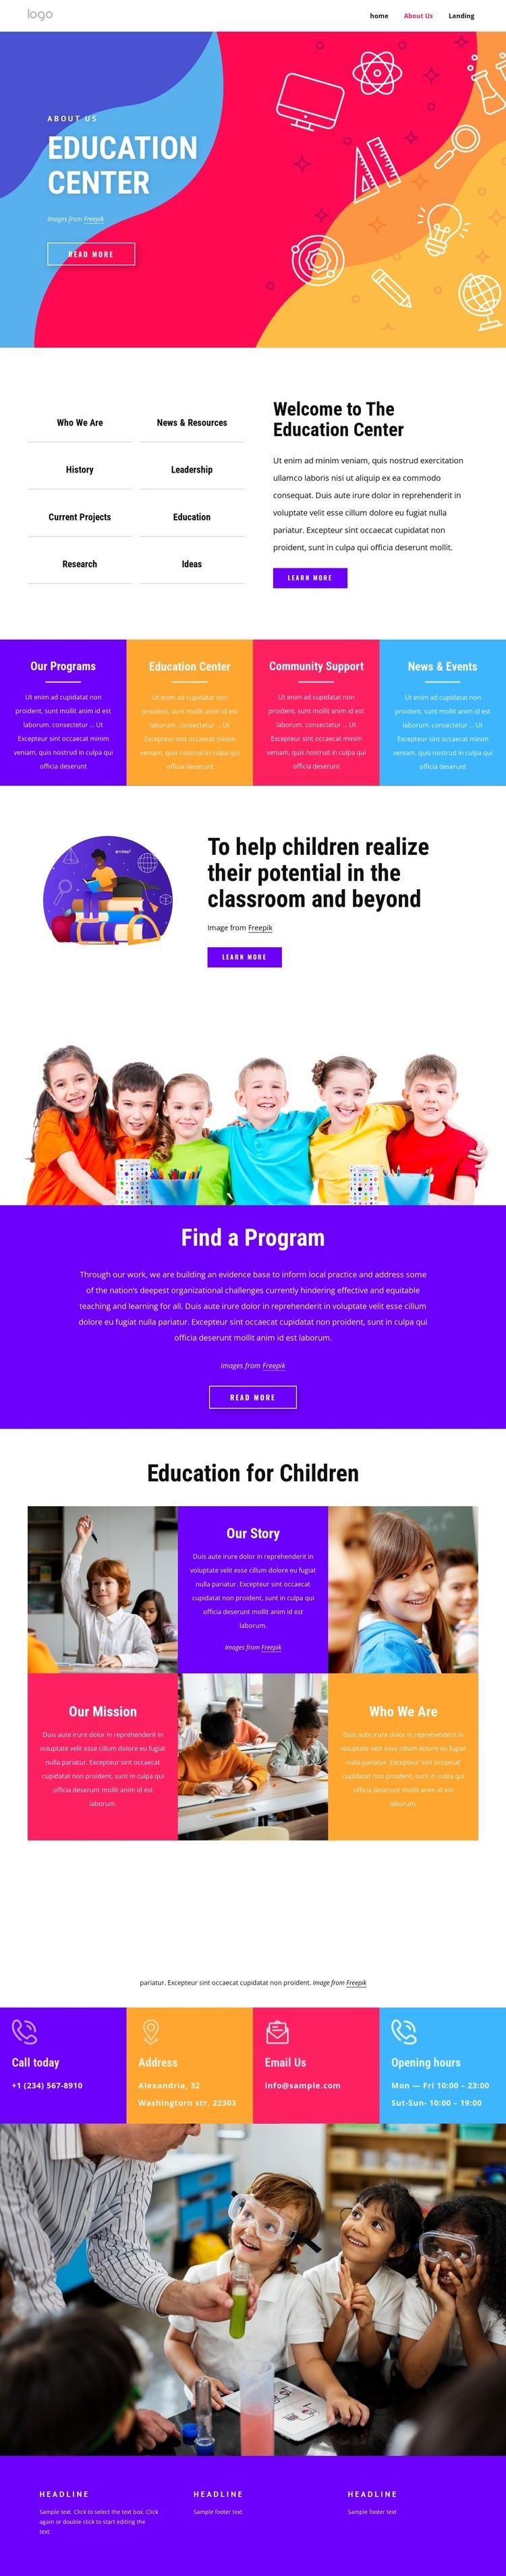 Family and education center Web Page Design